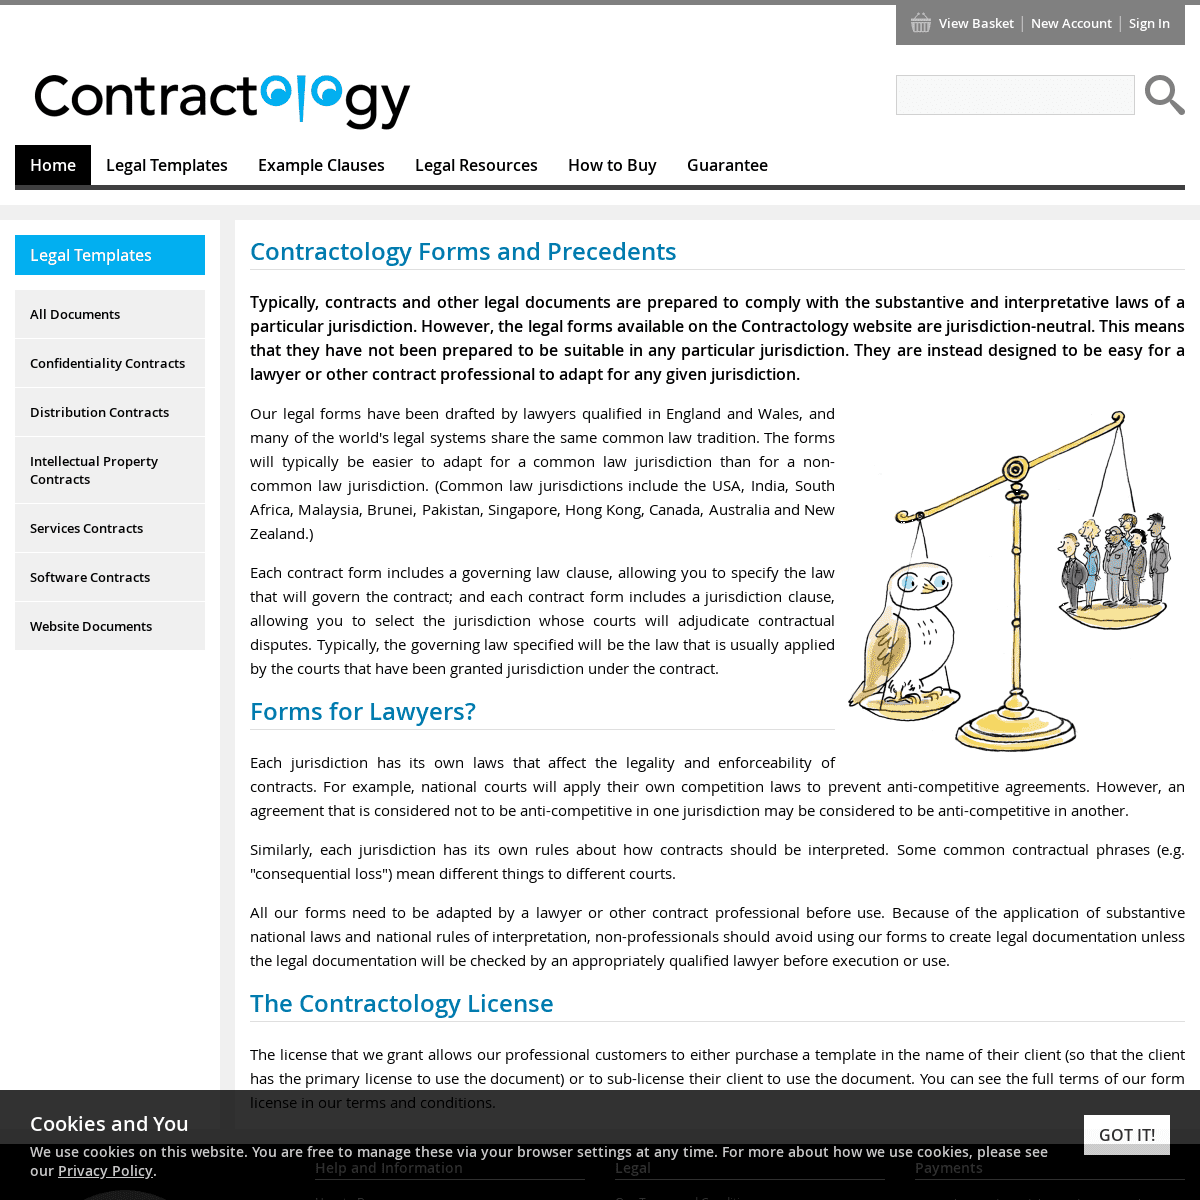 A complete backup of contractology.com